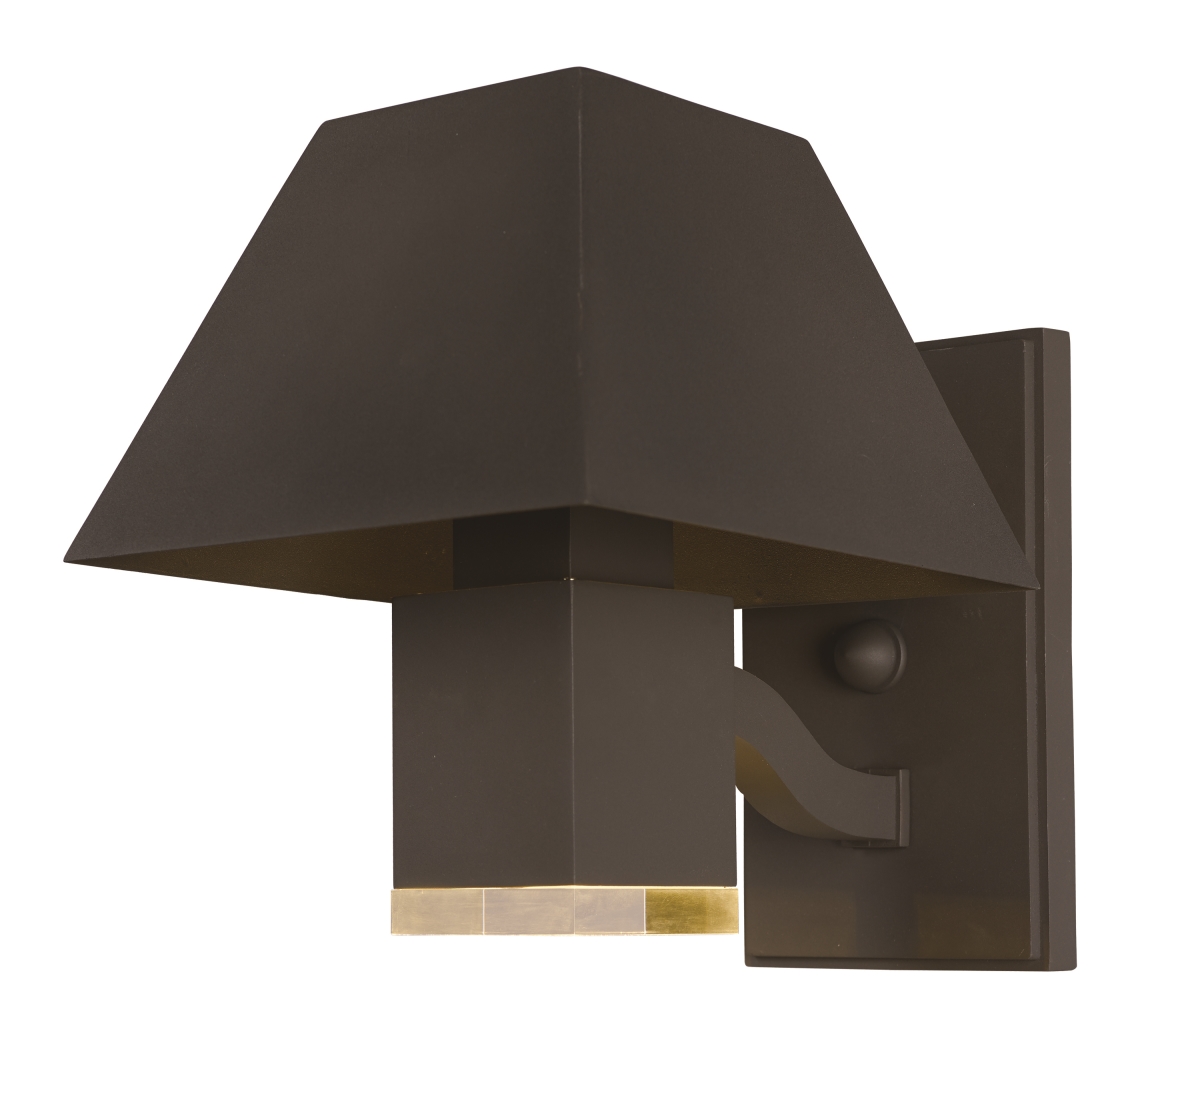 53514clabz 12.25 In. Pavilion Led Outdoor Post Mount - Architectural Bronze